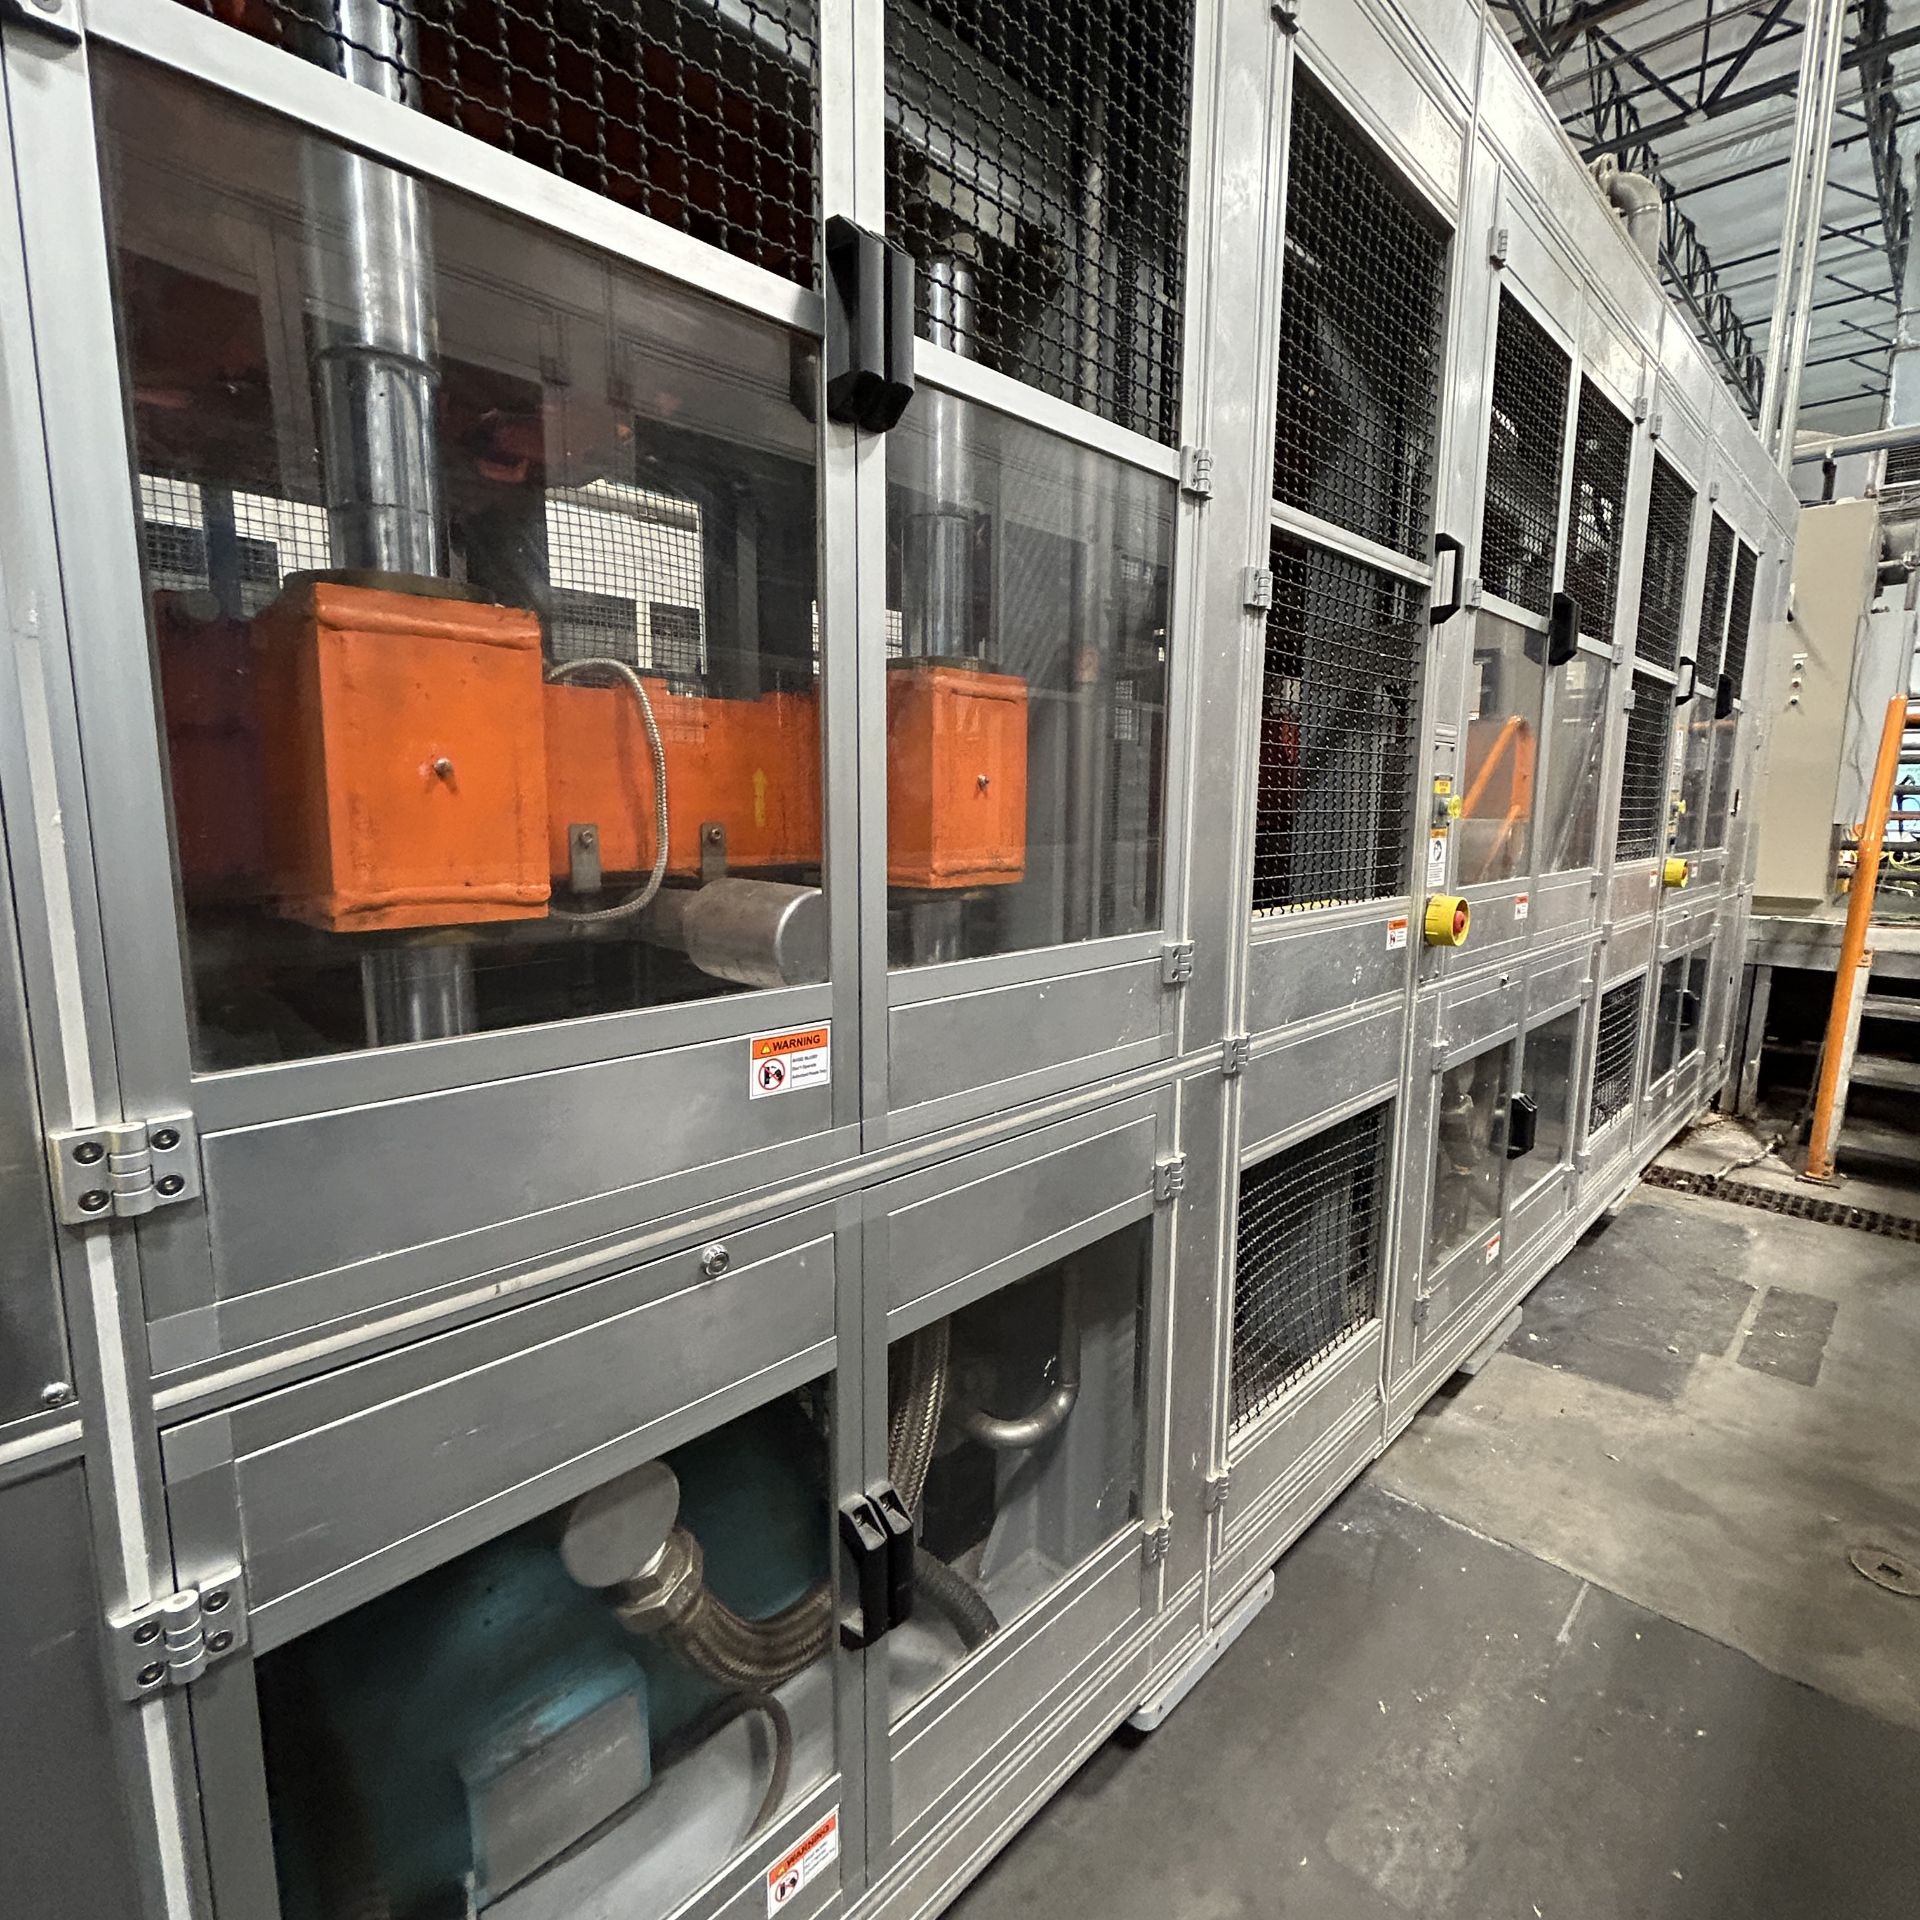 TPM-1500 3-Stage Pulp Thermoforming Machine Equipped With (1) 2018 TPM-AS-1500 2-Stage Auto Stacker - Image 10 of 35